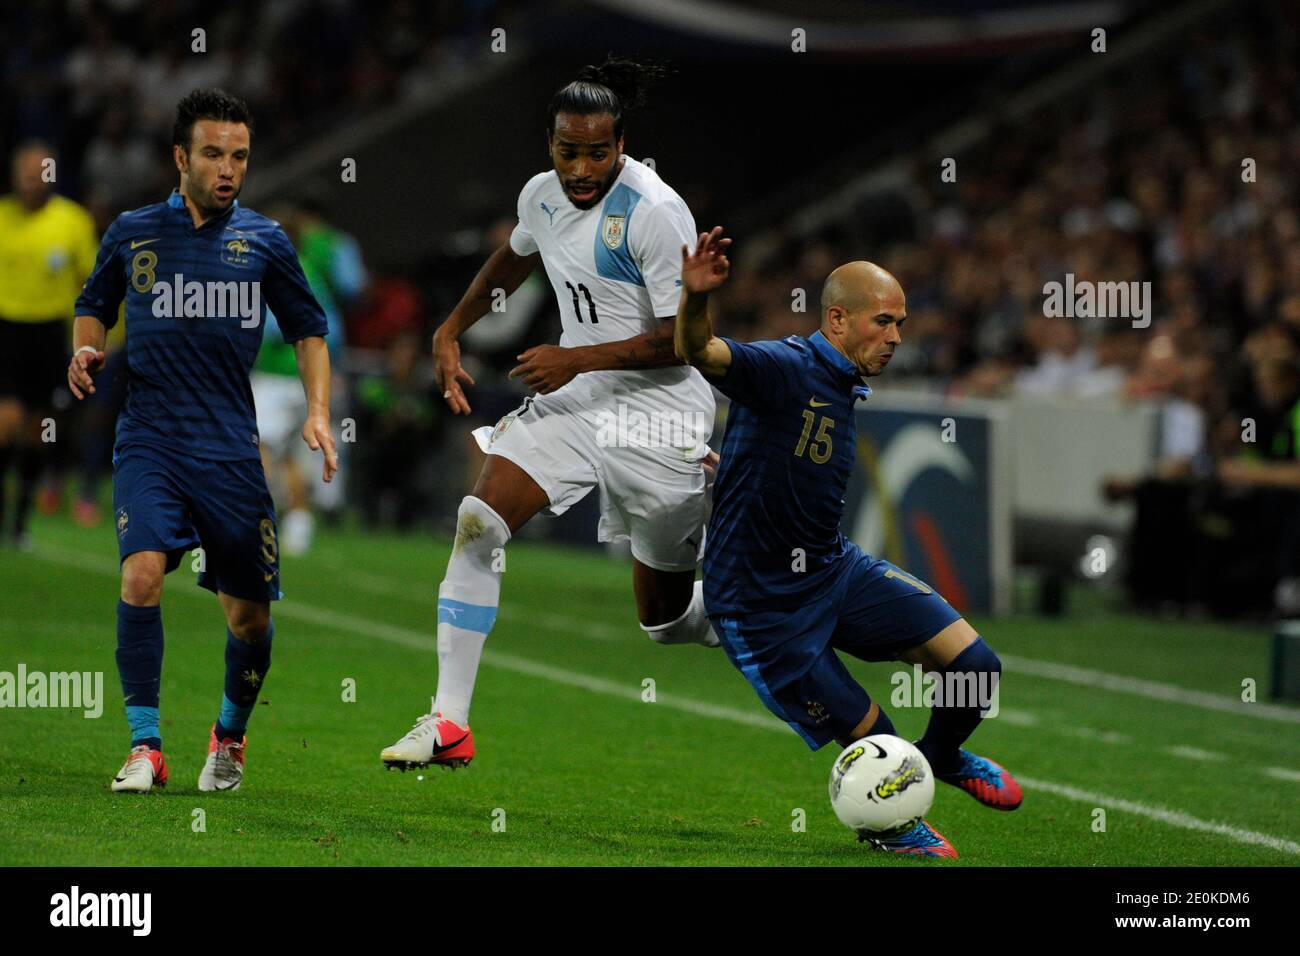 France's Christophe Jallet and Mathieu Valbuena battling Uruguay's Alvaro Pereira during a friendly soccer match, France vs Uruguay in Le Havre, France, on August 15th, 2012. France and Uruguay drew 0-0. Photo by Henri Szwarc/ABACAPRESS.COM Stock Photo